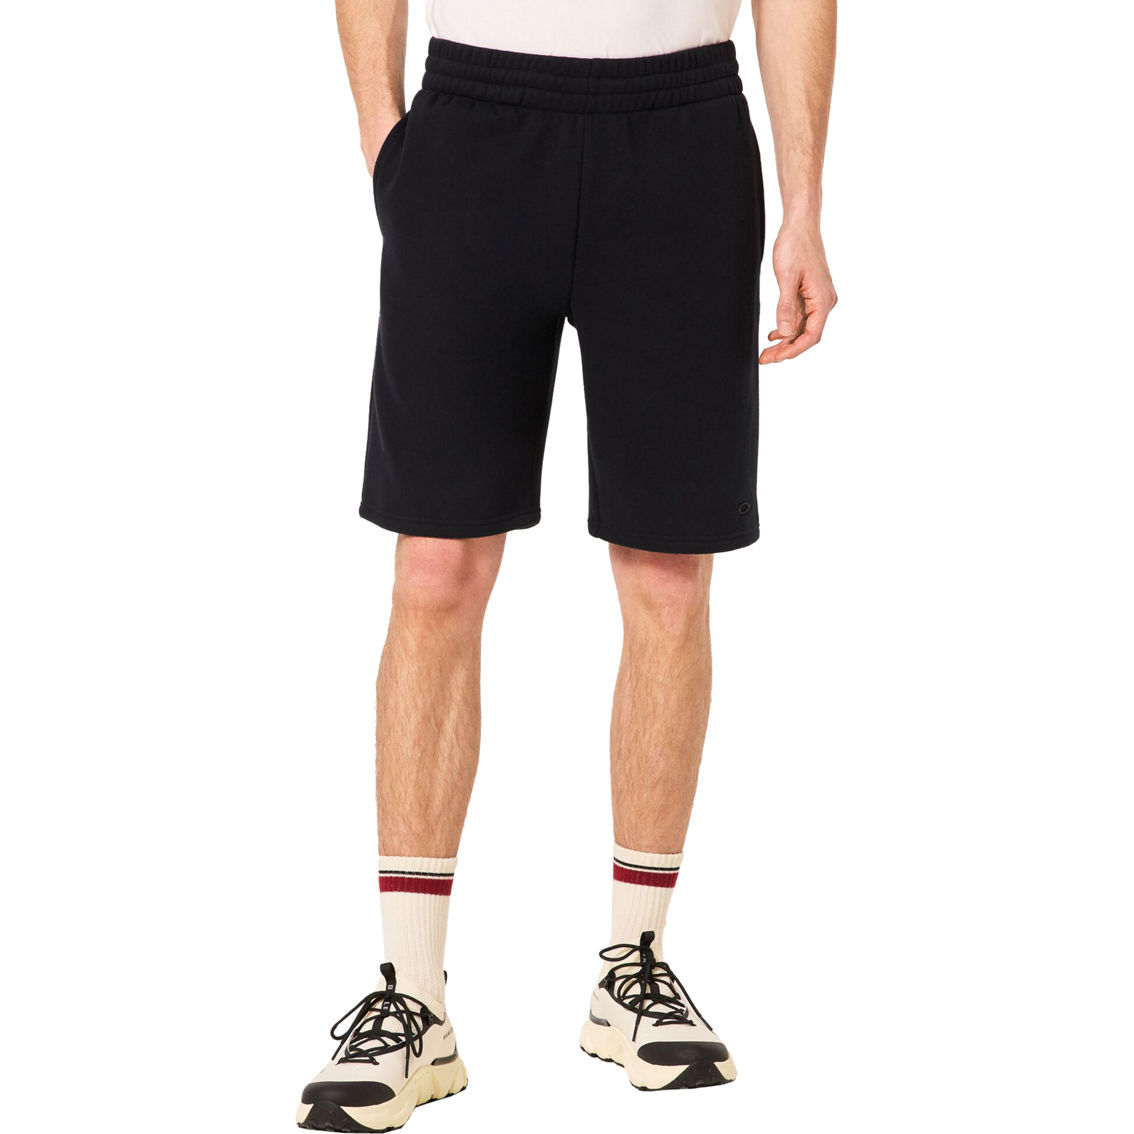 Oakley Relax Shorts 2.0 - Image 4 of 4